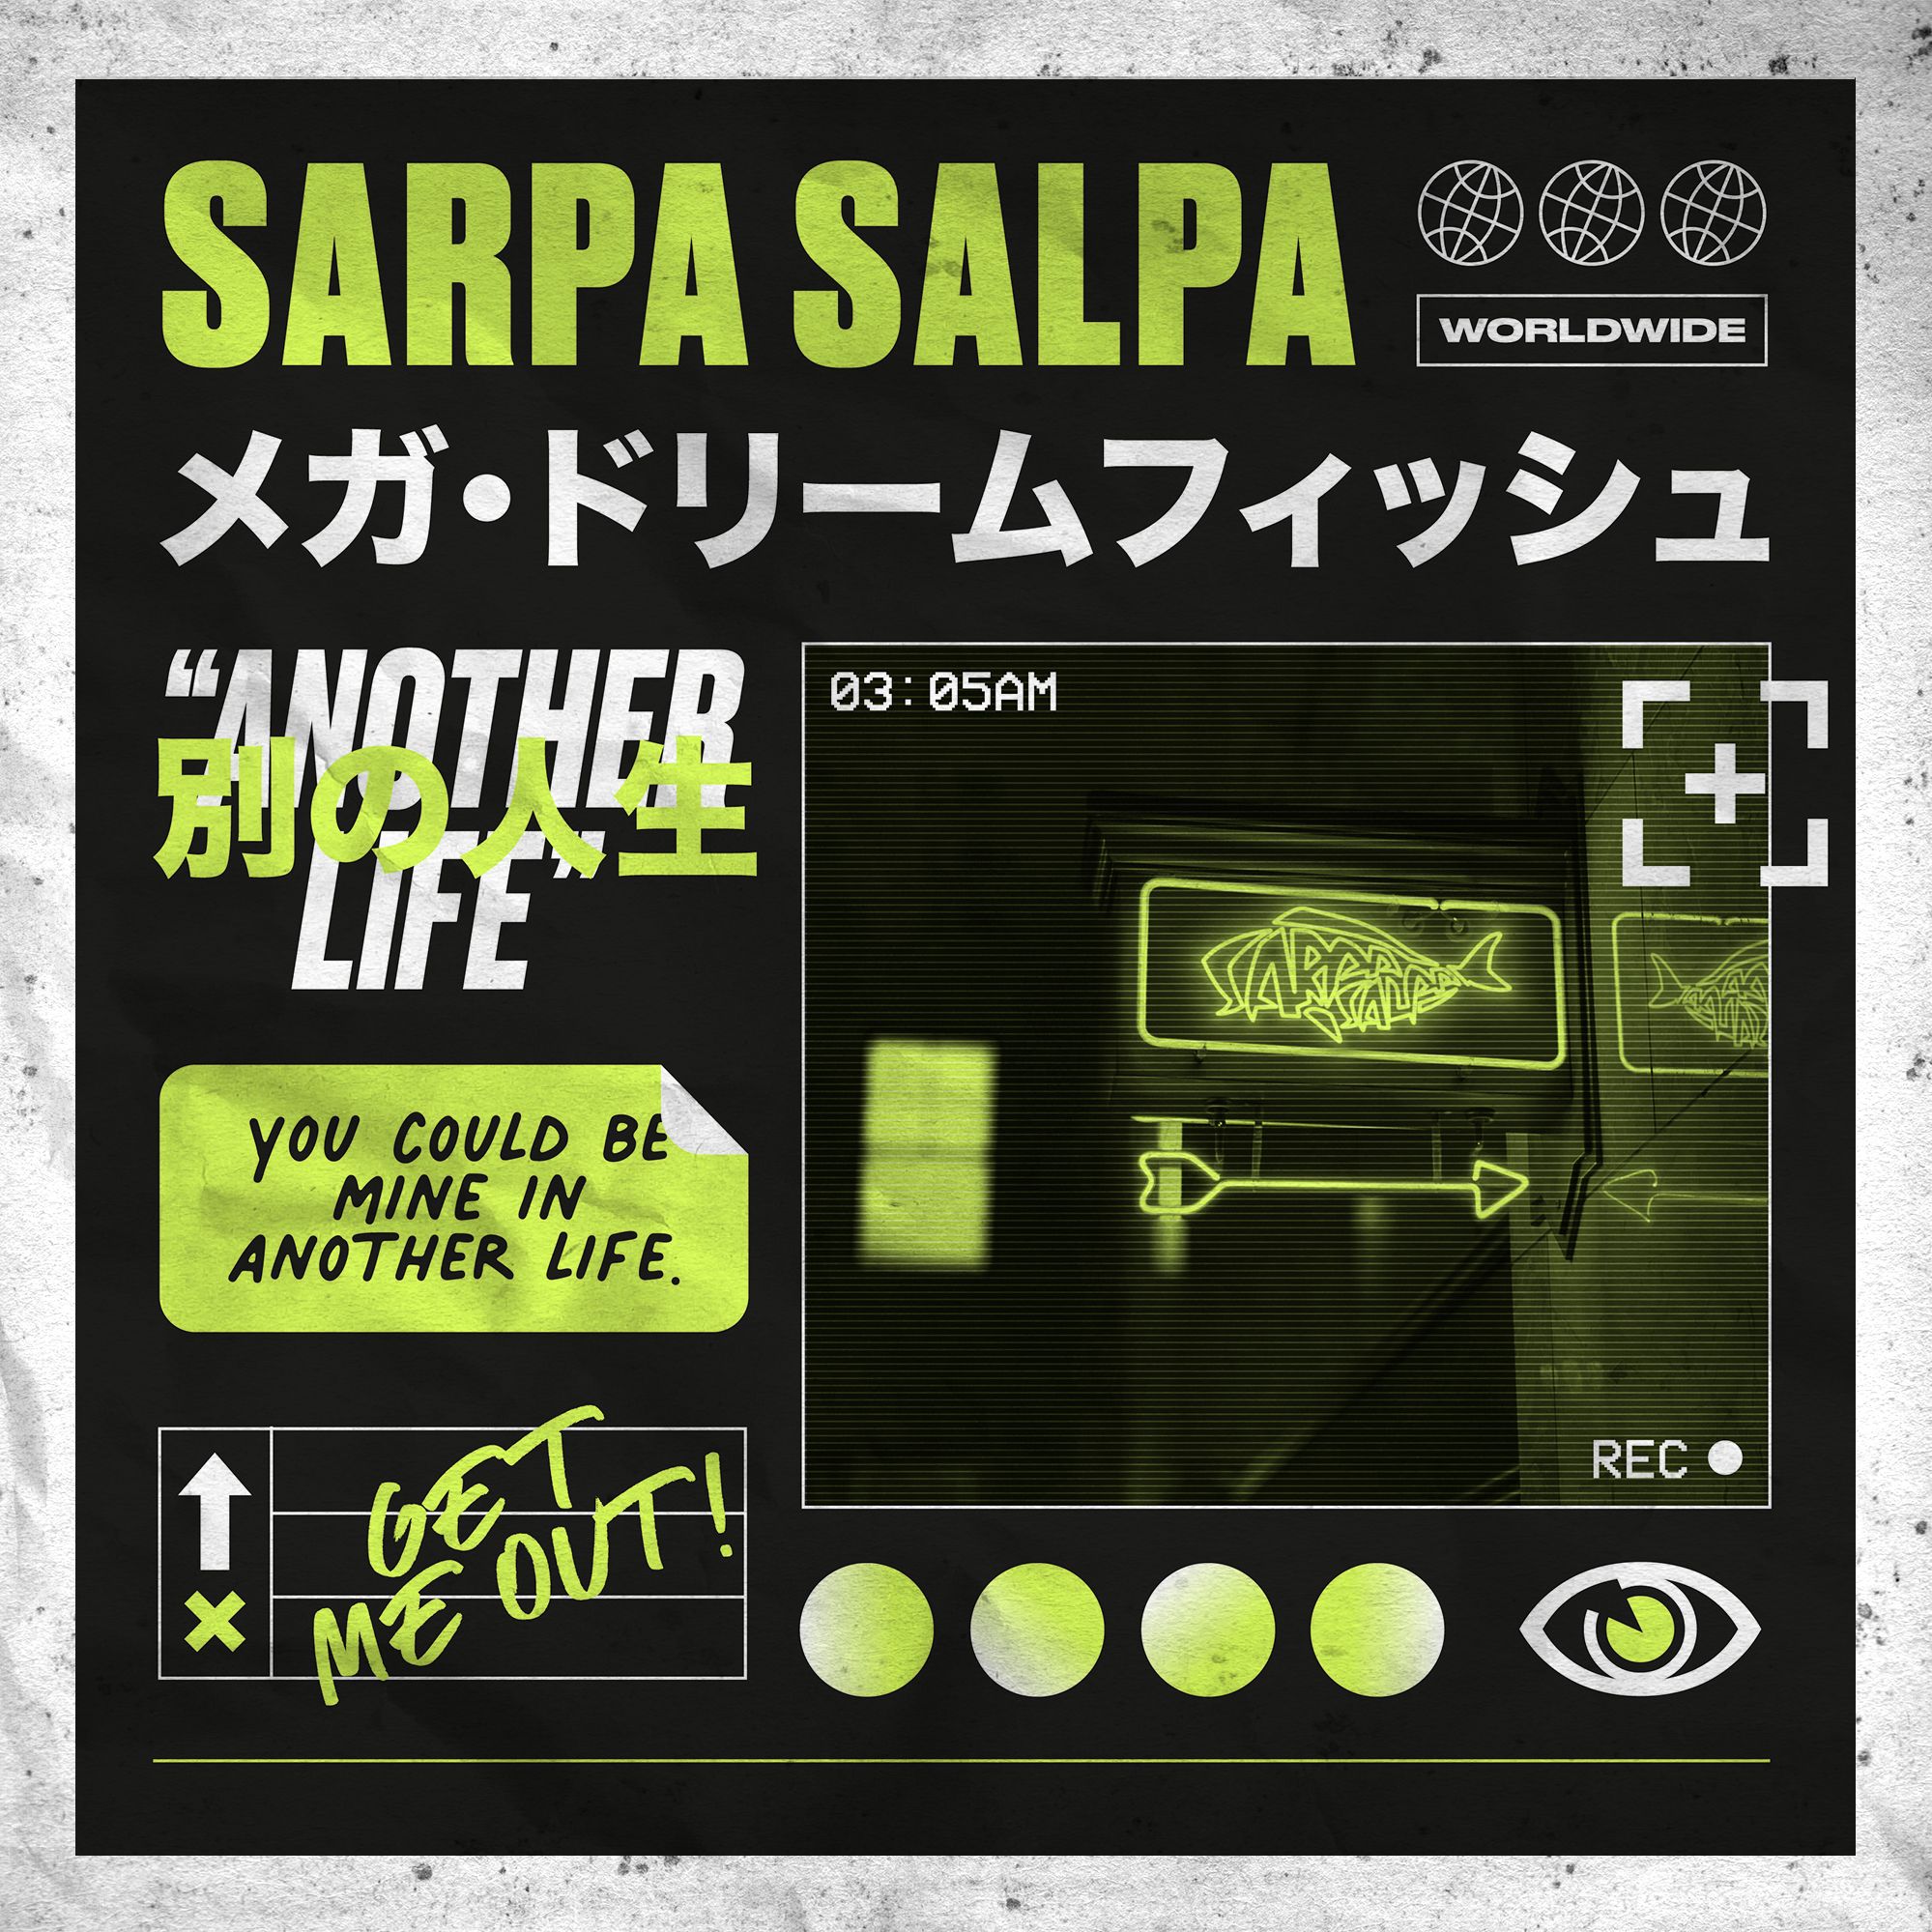 another life - sarpa salpa - UK - indie - indie music - indie rock - new music - music blog - wolf in a suit - wolfinasuit - wolf in a suit blog - wolf in a suit music blog